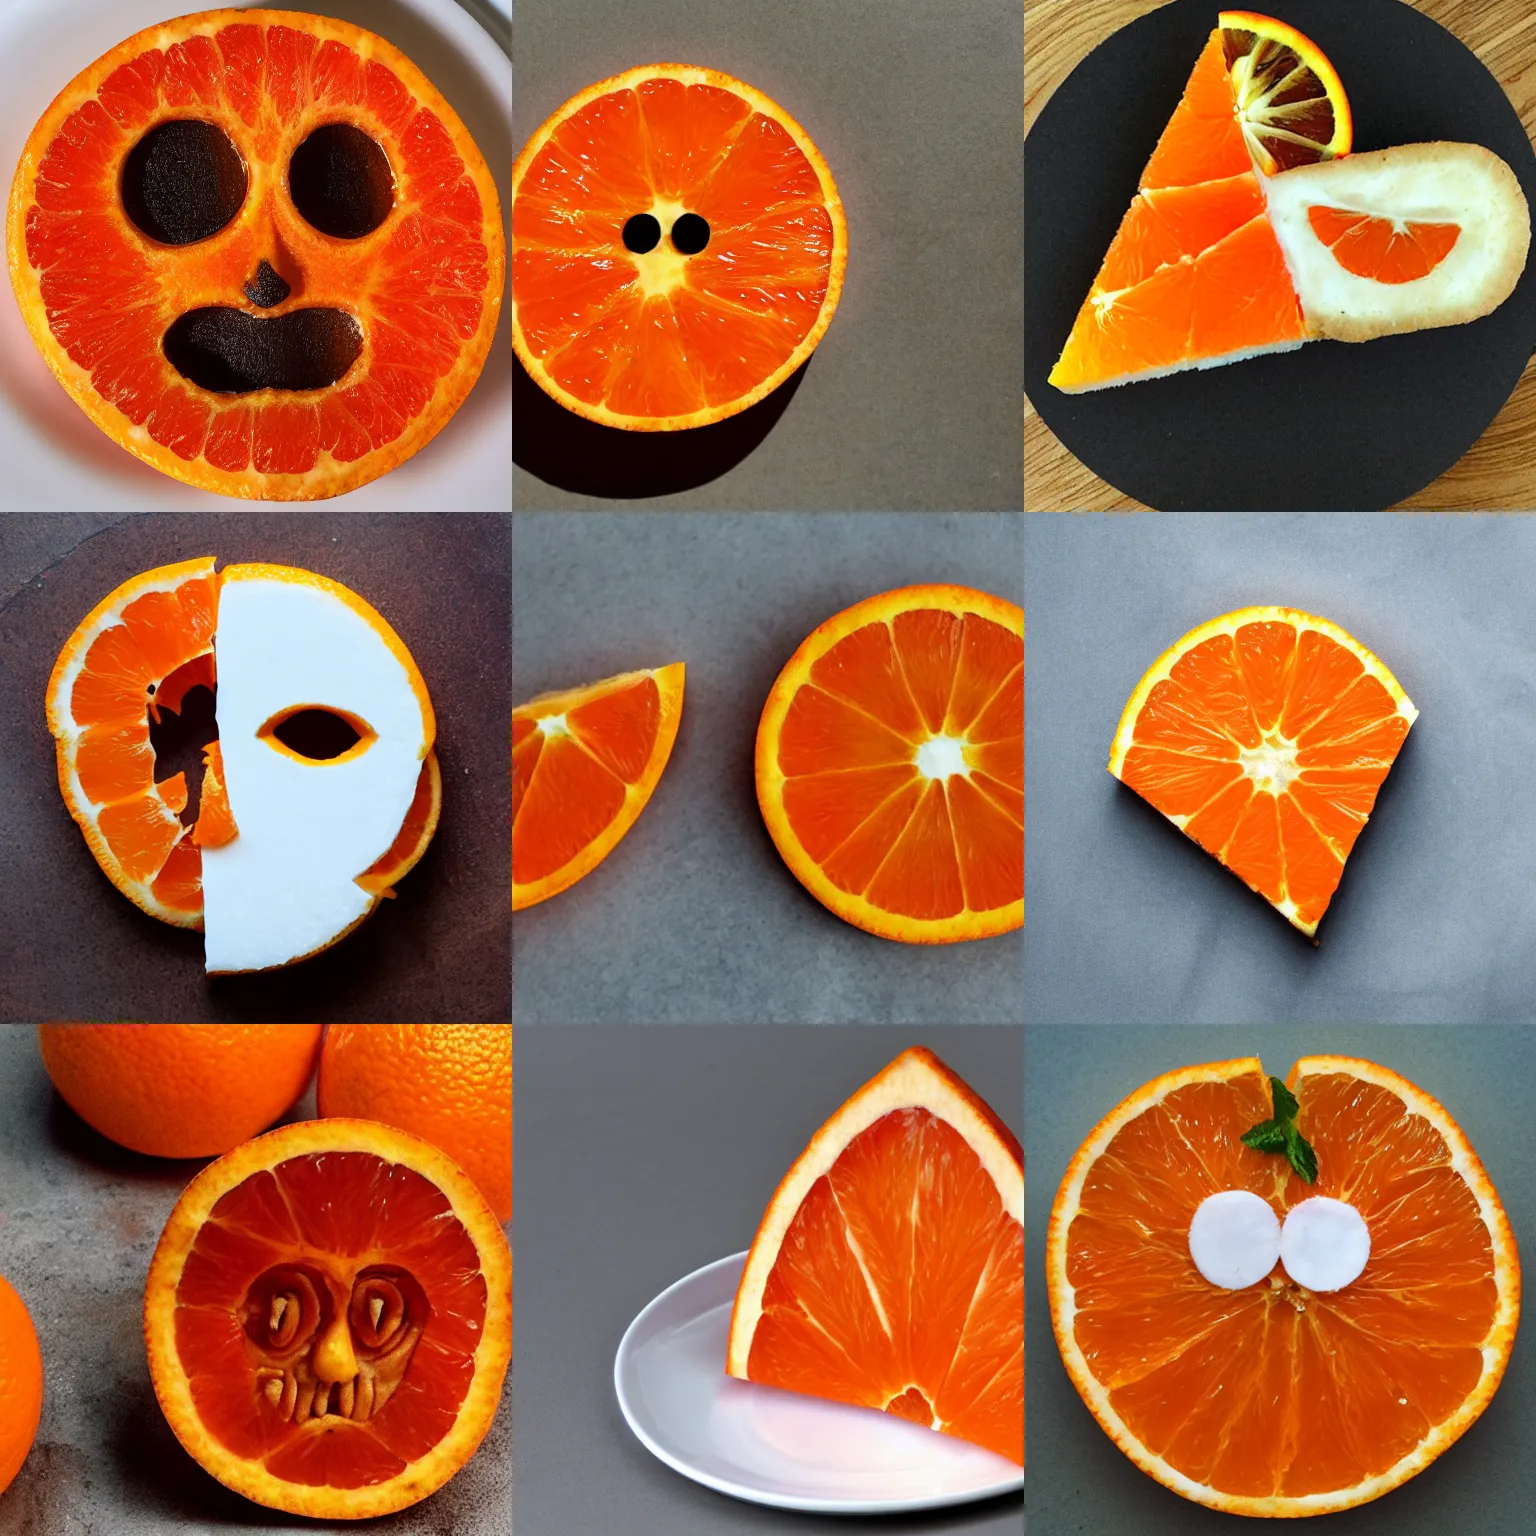 Prompt: orange slice with a human face